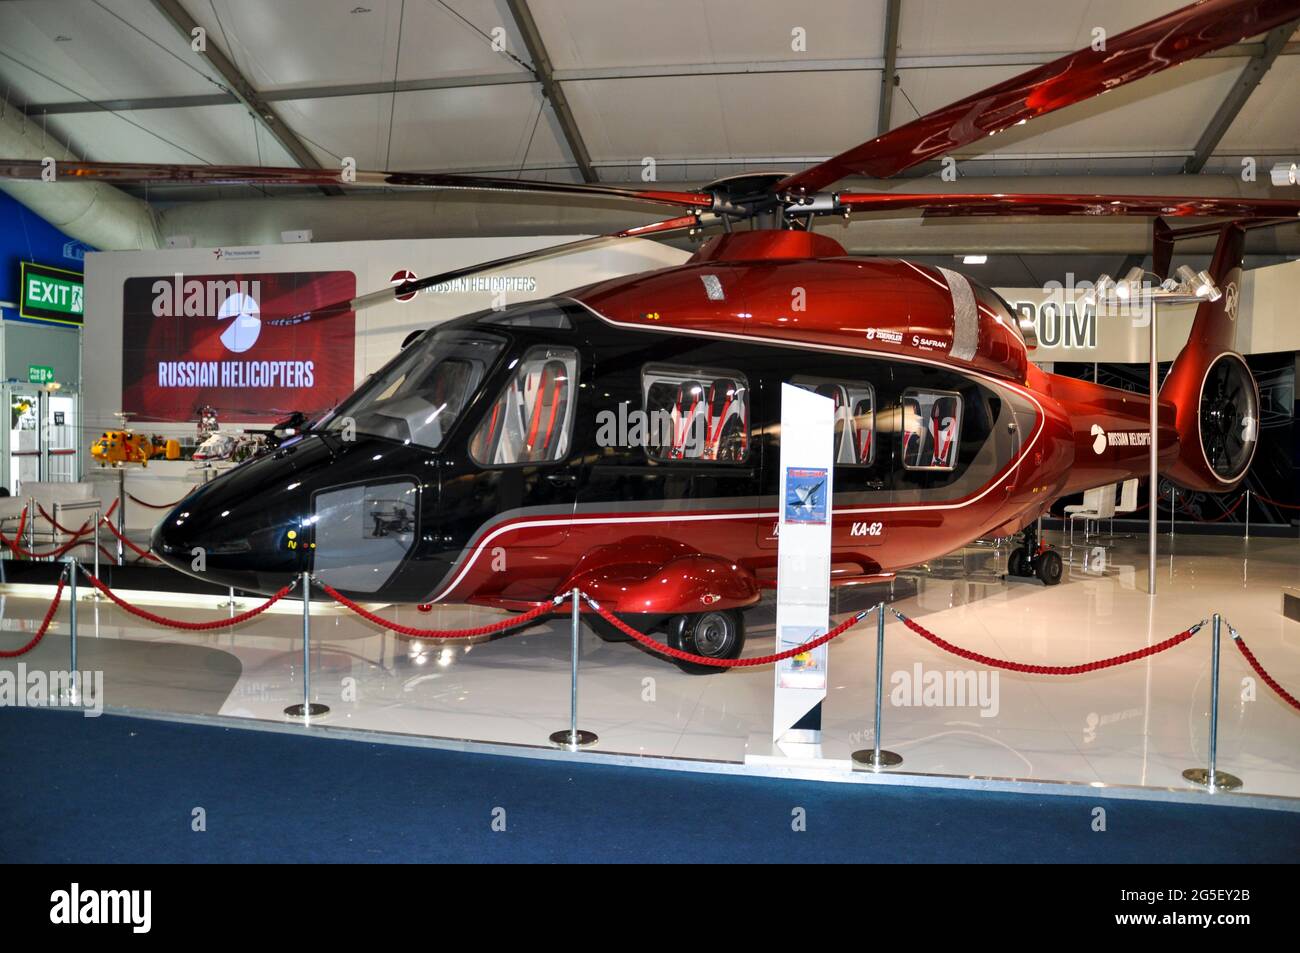 Russian Helicopters exhibition stand with a Kamov KA-62 helicopter at the Farnborough International Airshow trade show 2012, UK. Exhibition hall Stock Photo